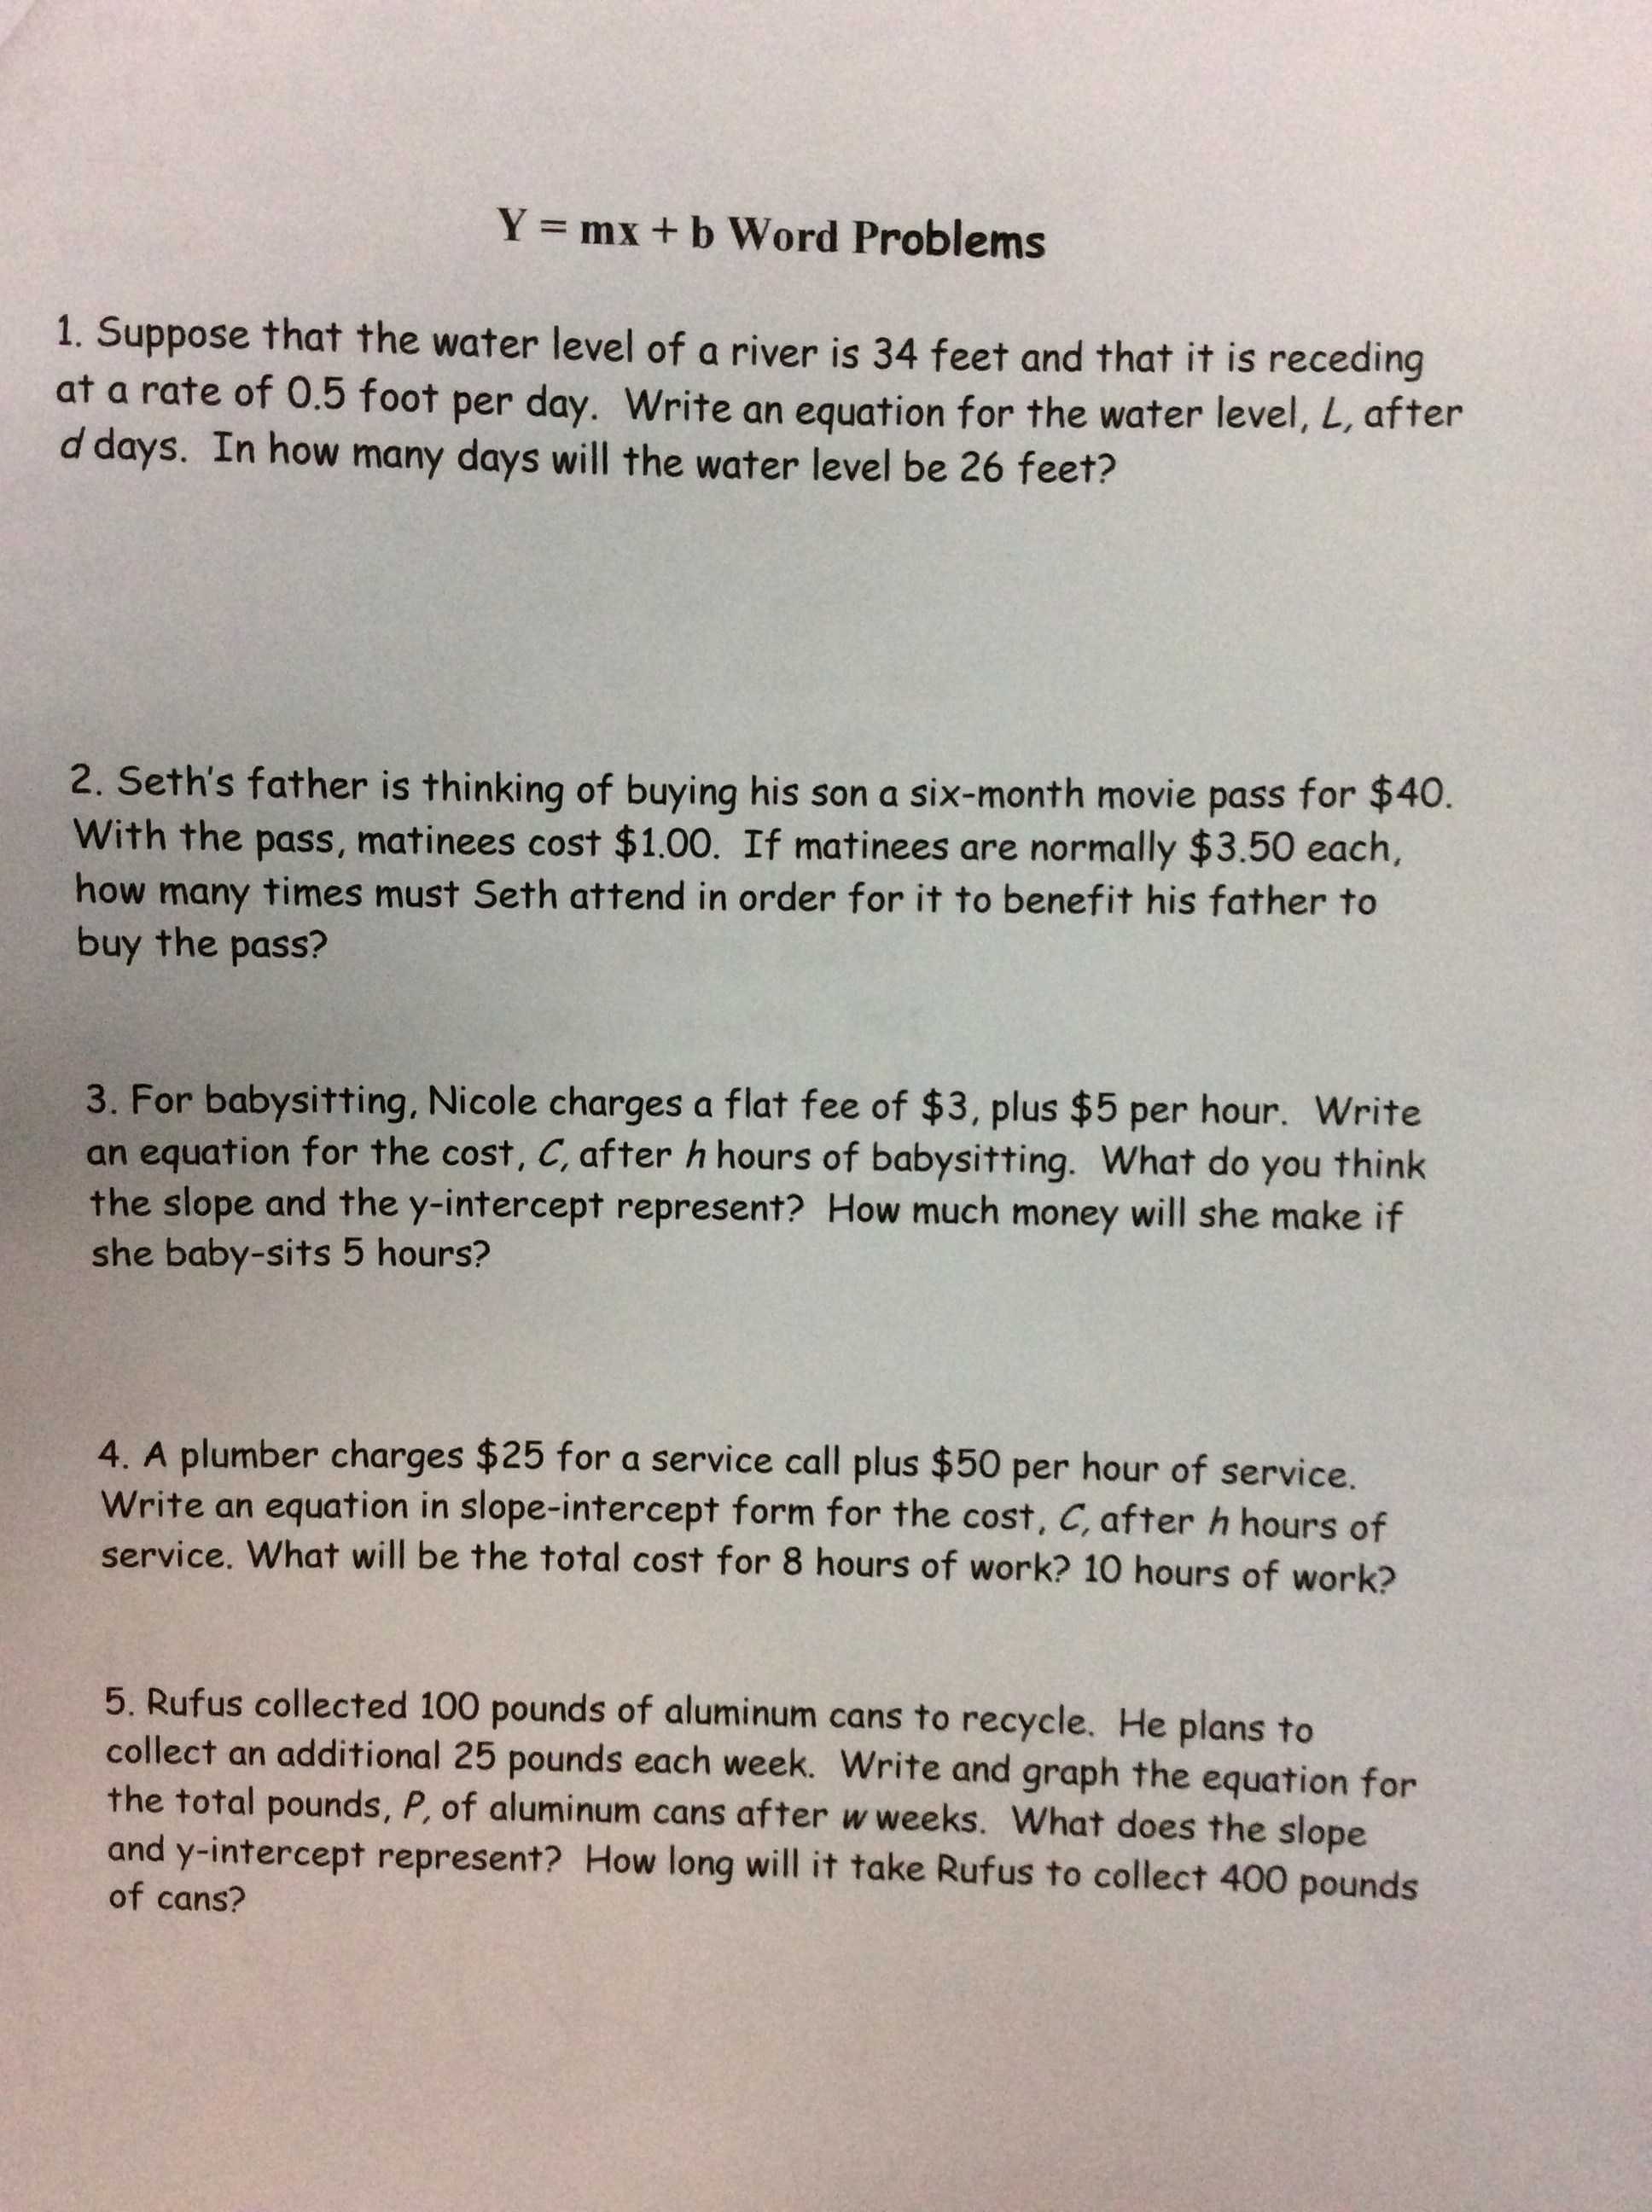 Simple and Compound Interest Practice Worksheet Answer Key as Well as Gorzycki Middle School